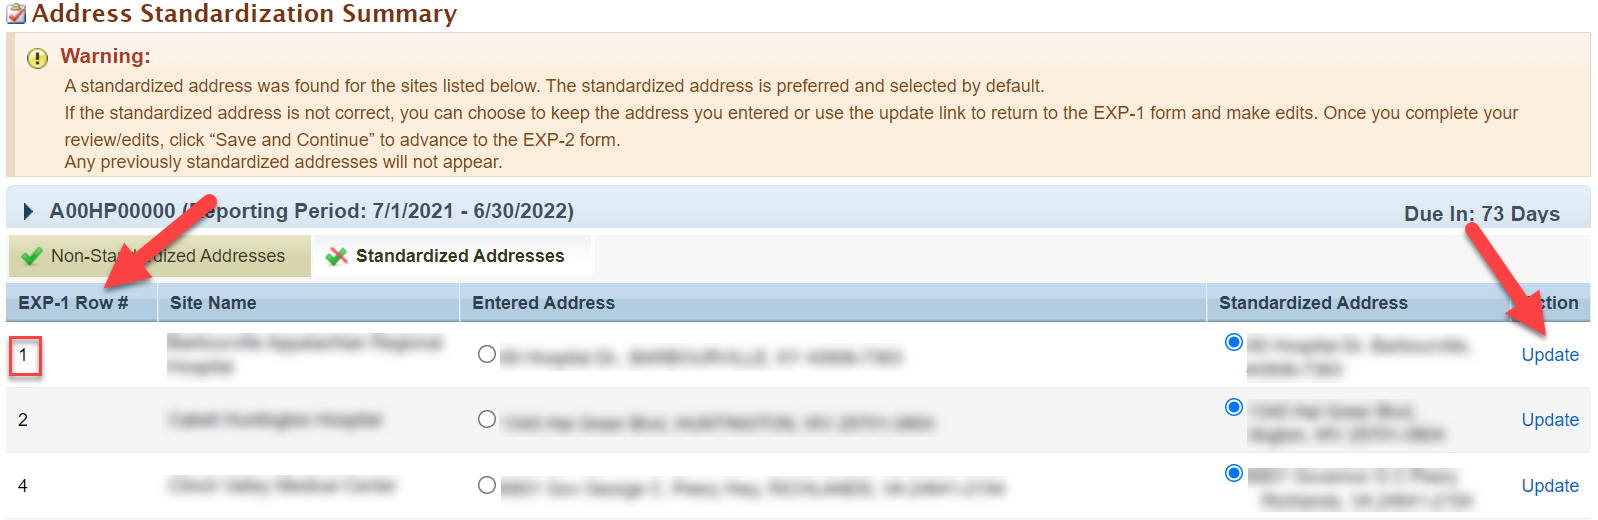 Screenshot of the Standardized Addresses tab showing the Update button